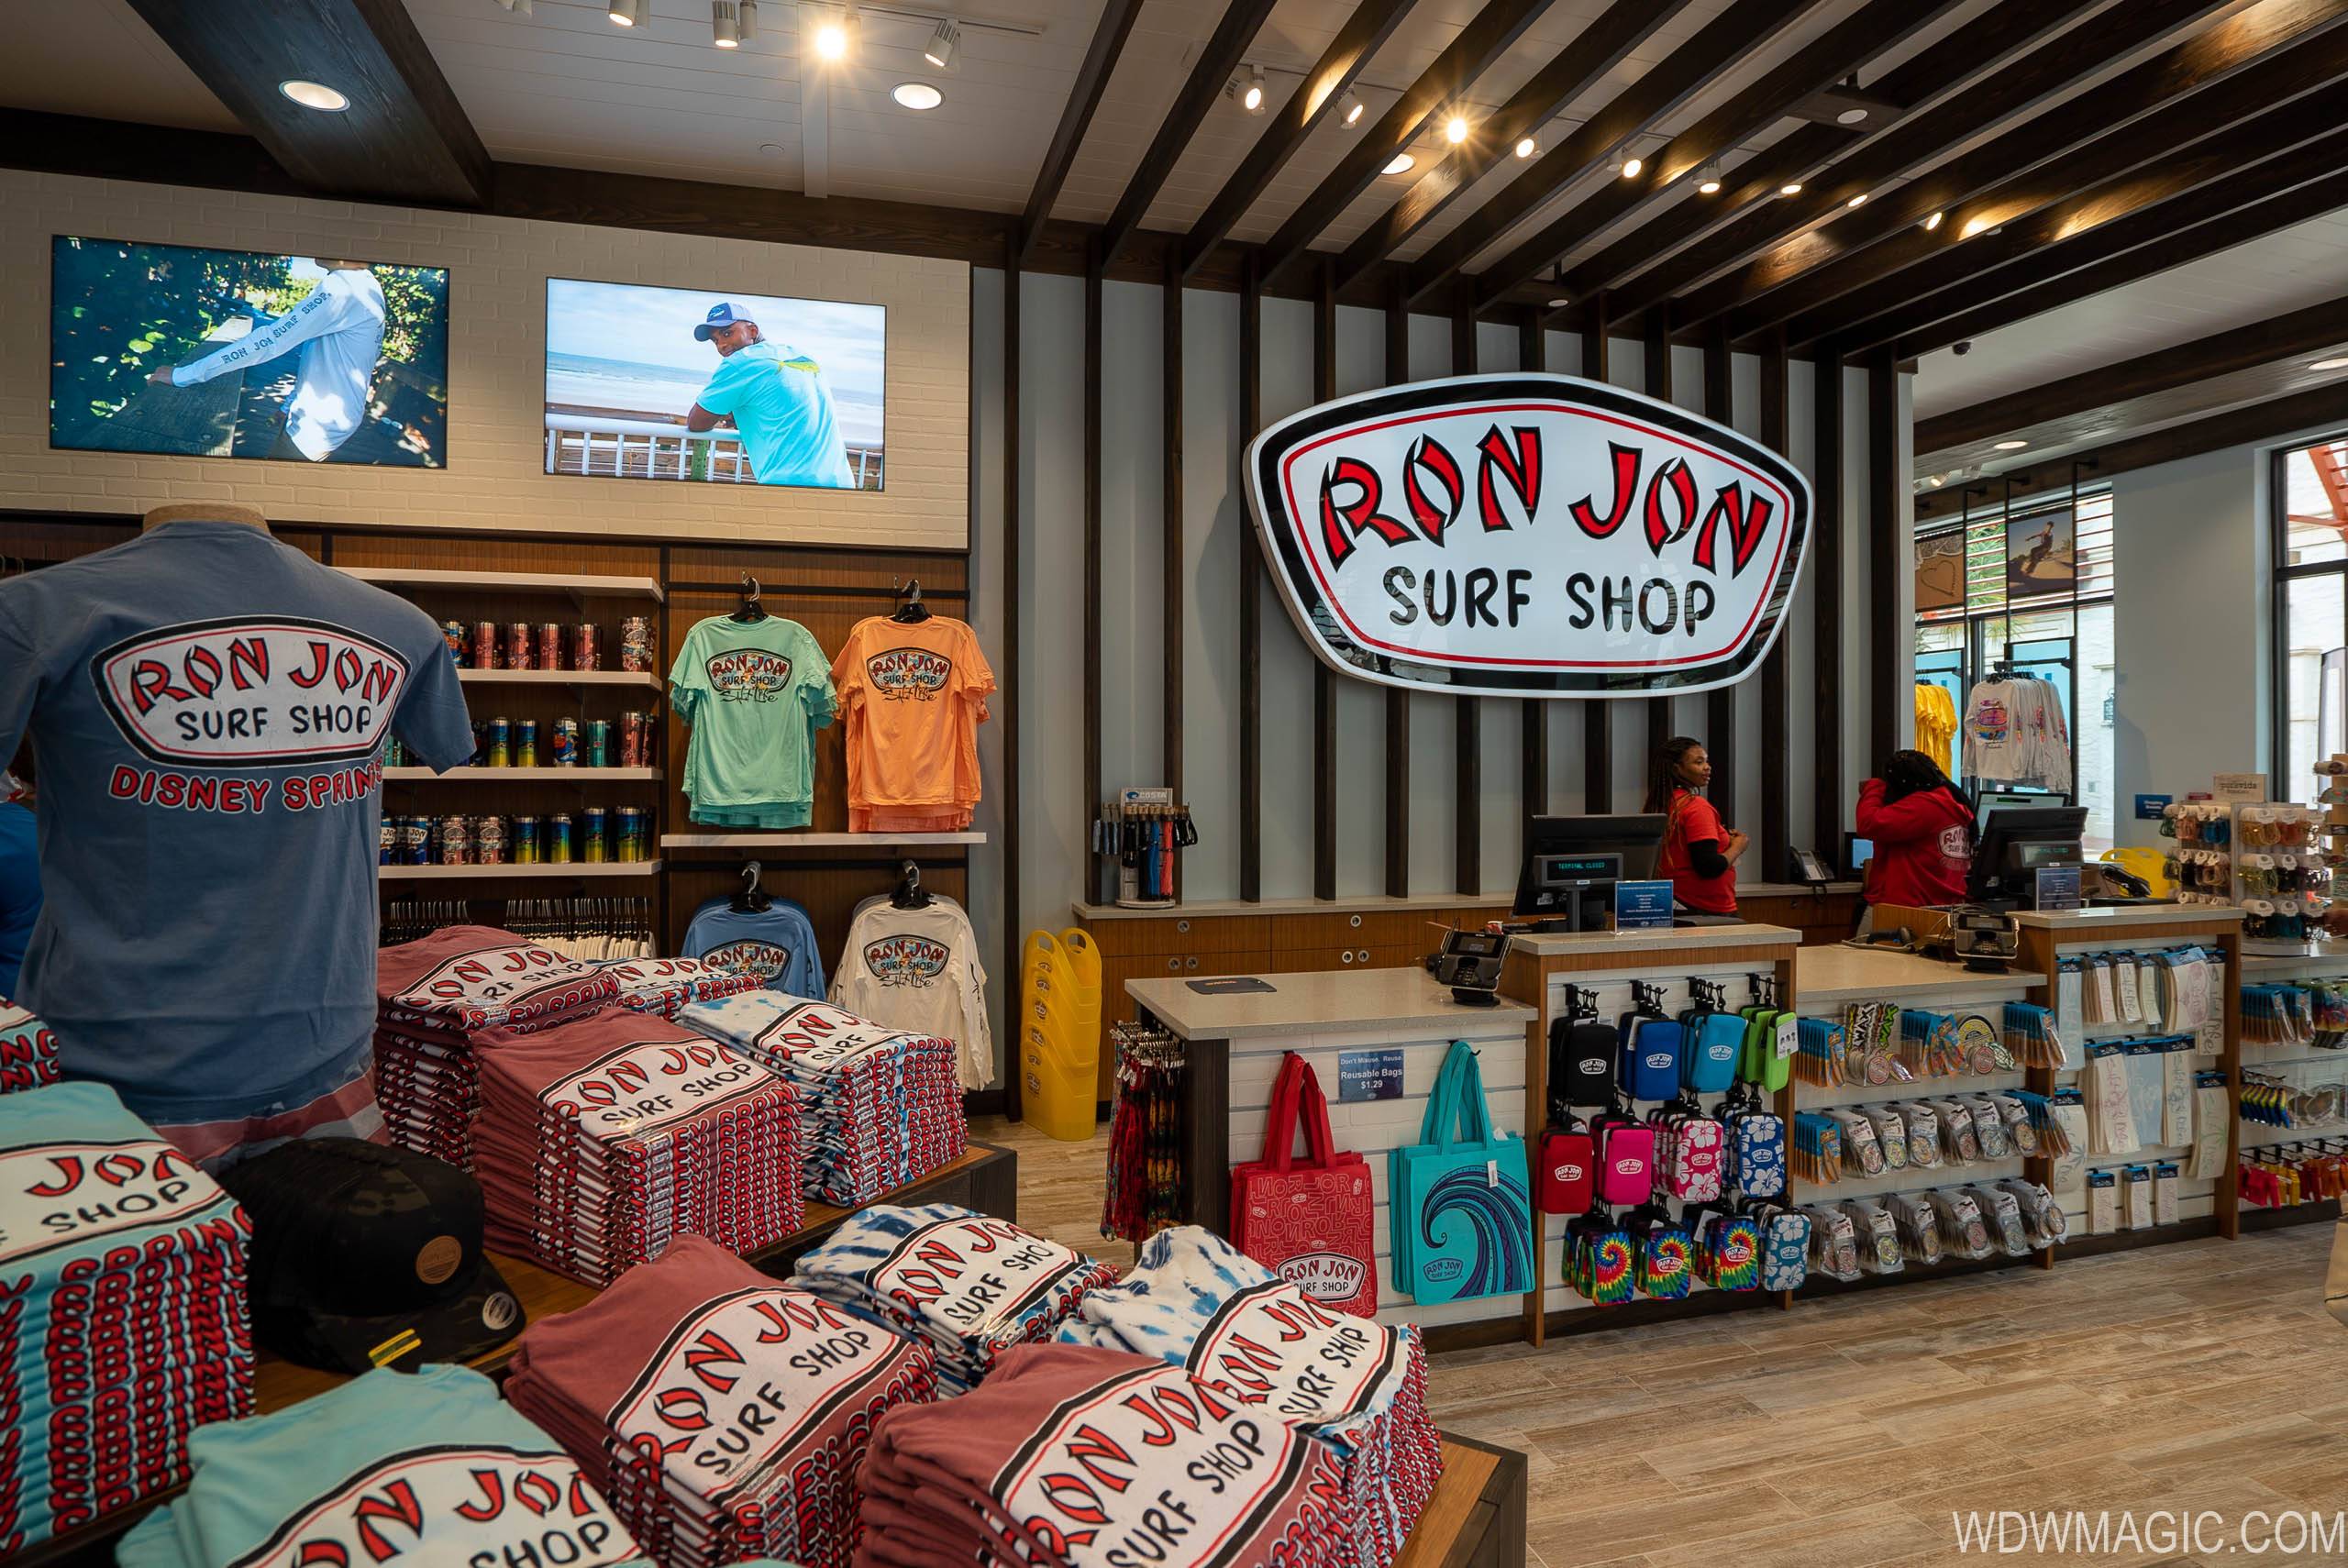 PHOTOS - First look at the new Ron Jon Surf Shop at Disney Springs